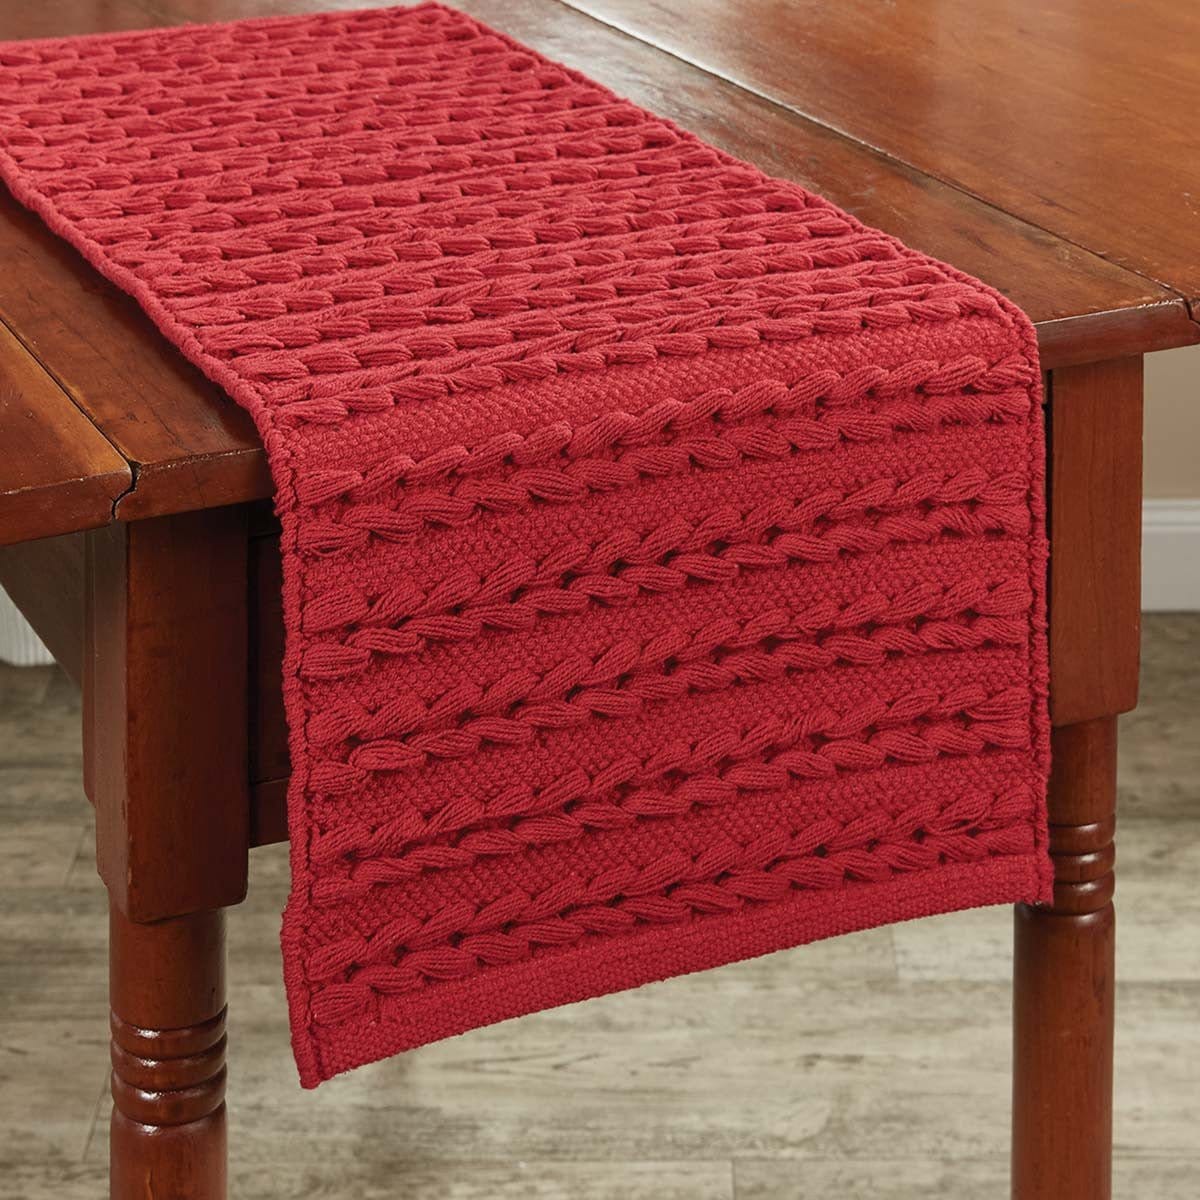 Winter Scarf Red Table Runner 36" Long-Park Designs-The Village Merchant